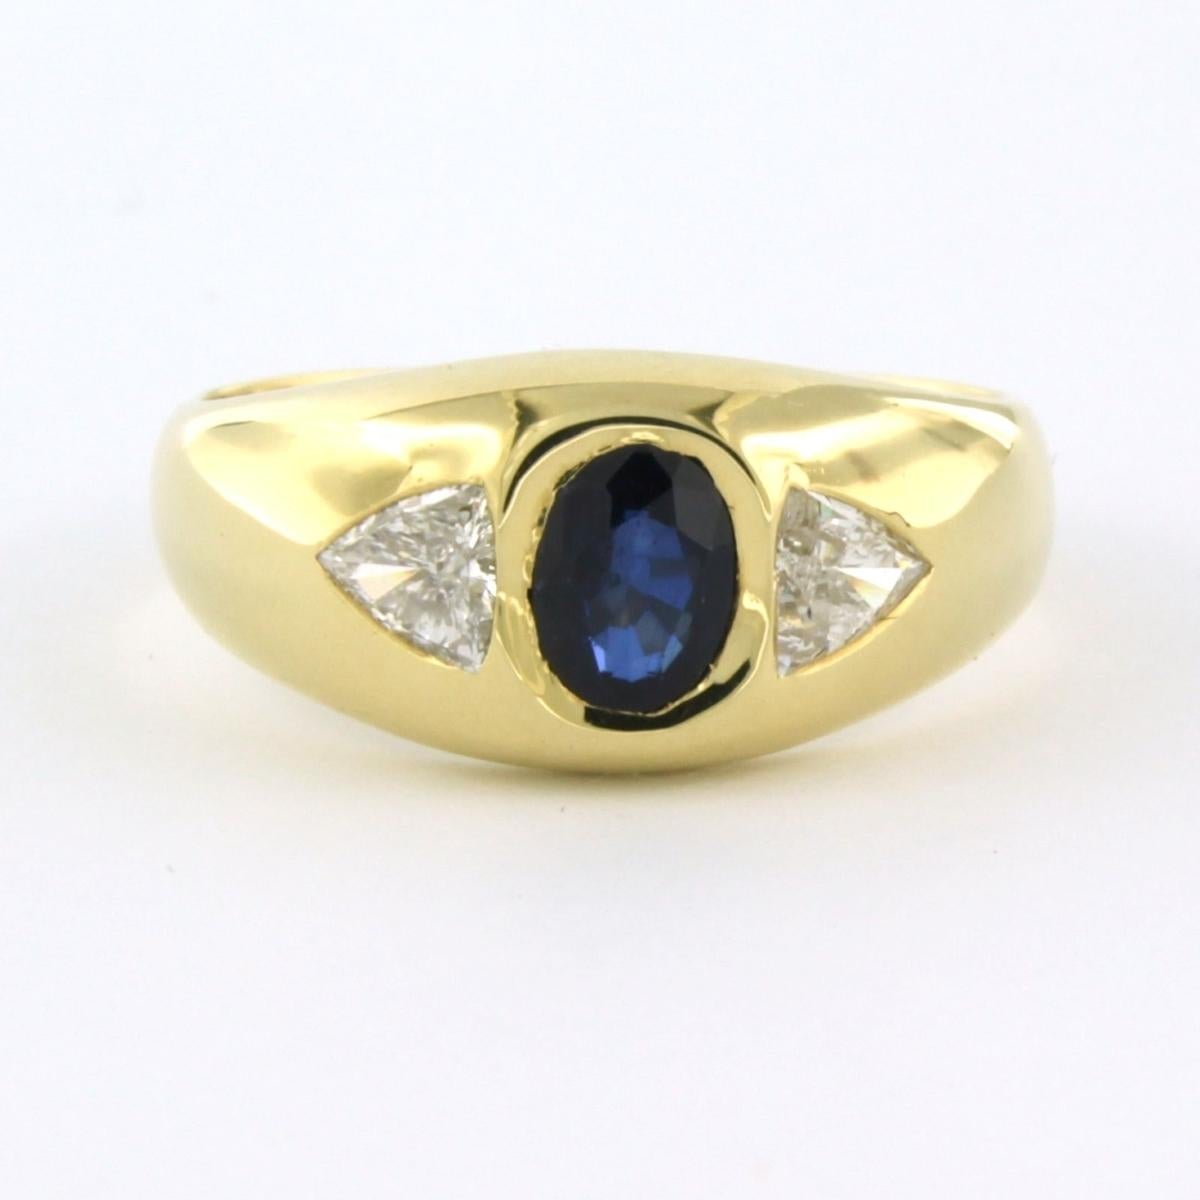 WEMPE - 18k yellow gold ring set with sapphire 1.10ct and triangle cut diamond up to. 0.80ct - ring size US 10.75 - EU. 20.5 (64)

detailed description:

The top of the ring is 1.0 cm wide

Weight 10.8 grams

ring size US 10.75 - EU. 20.5 (64), the